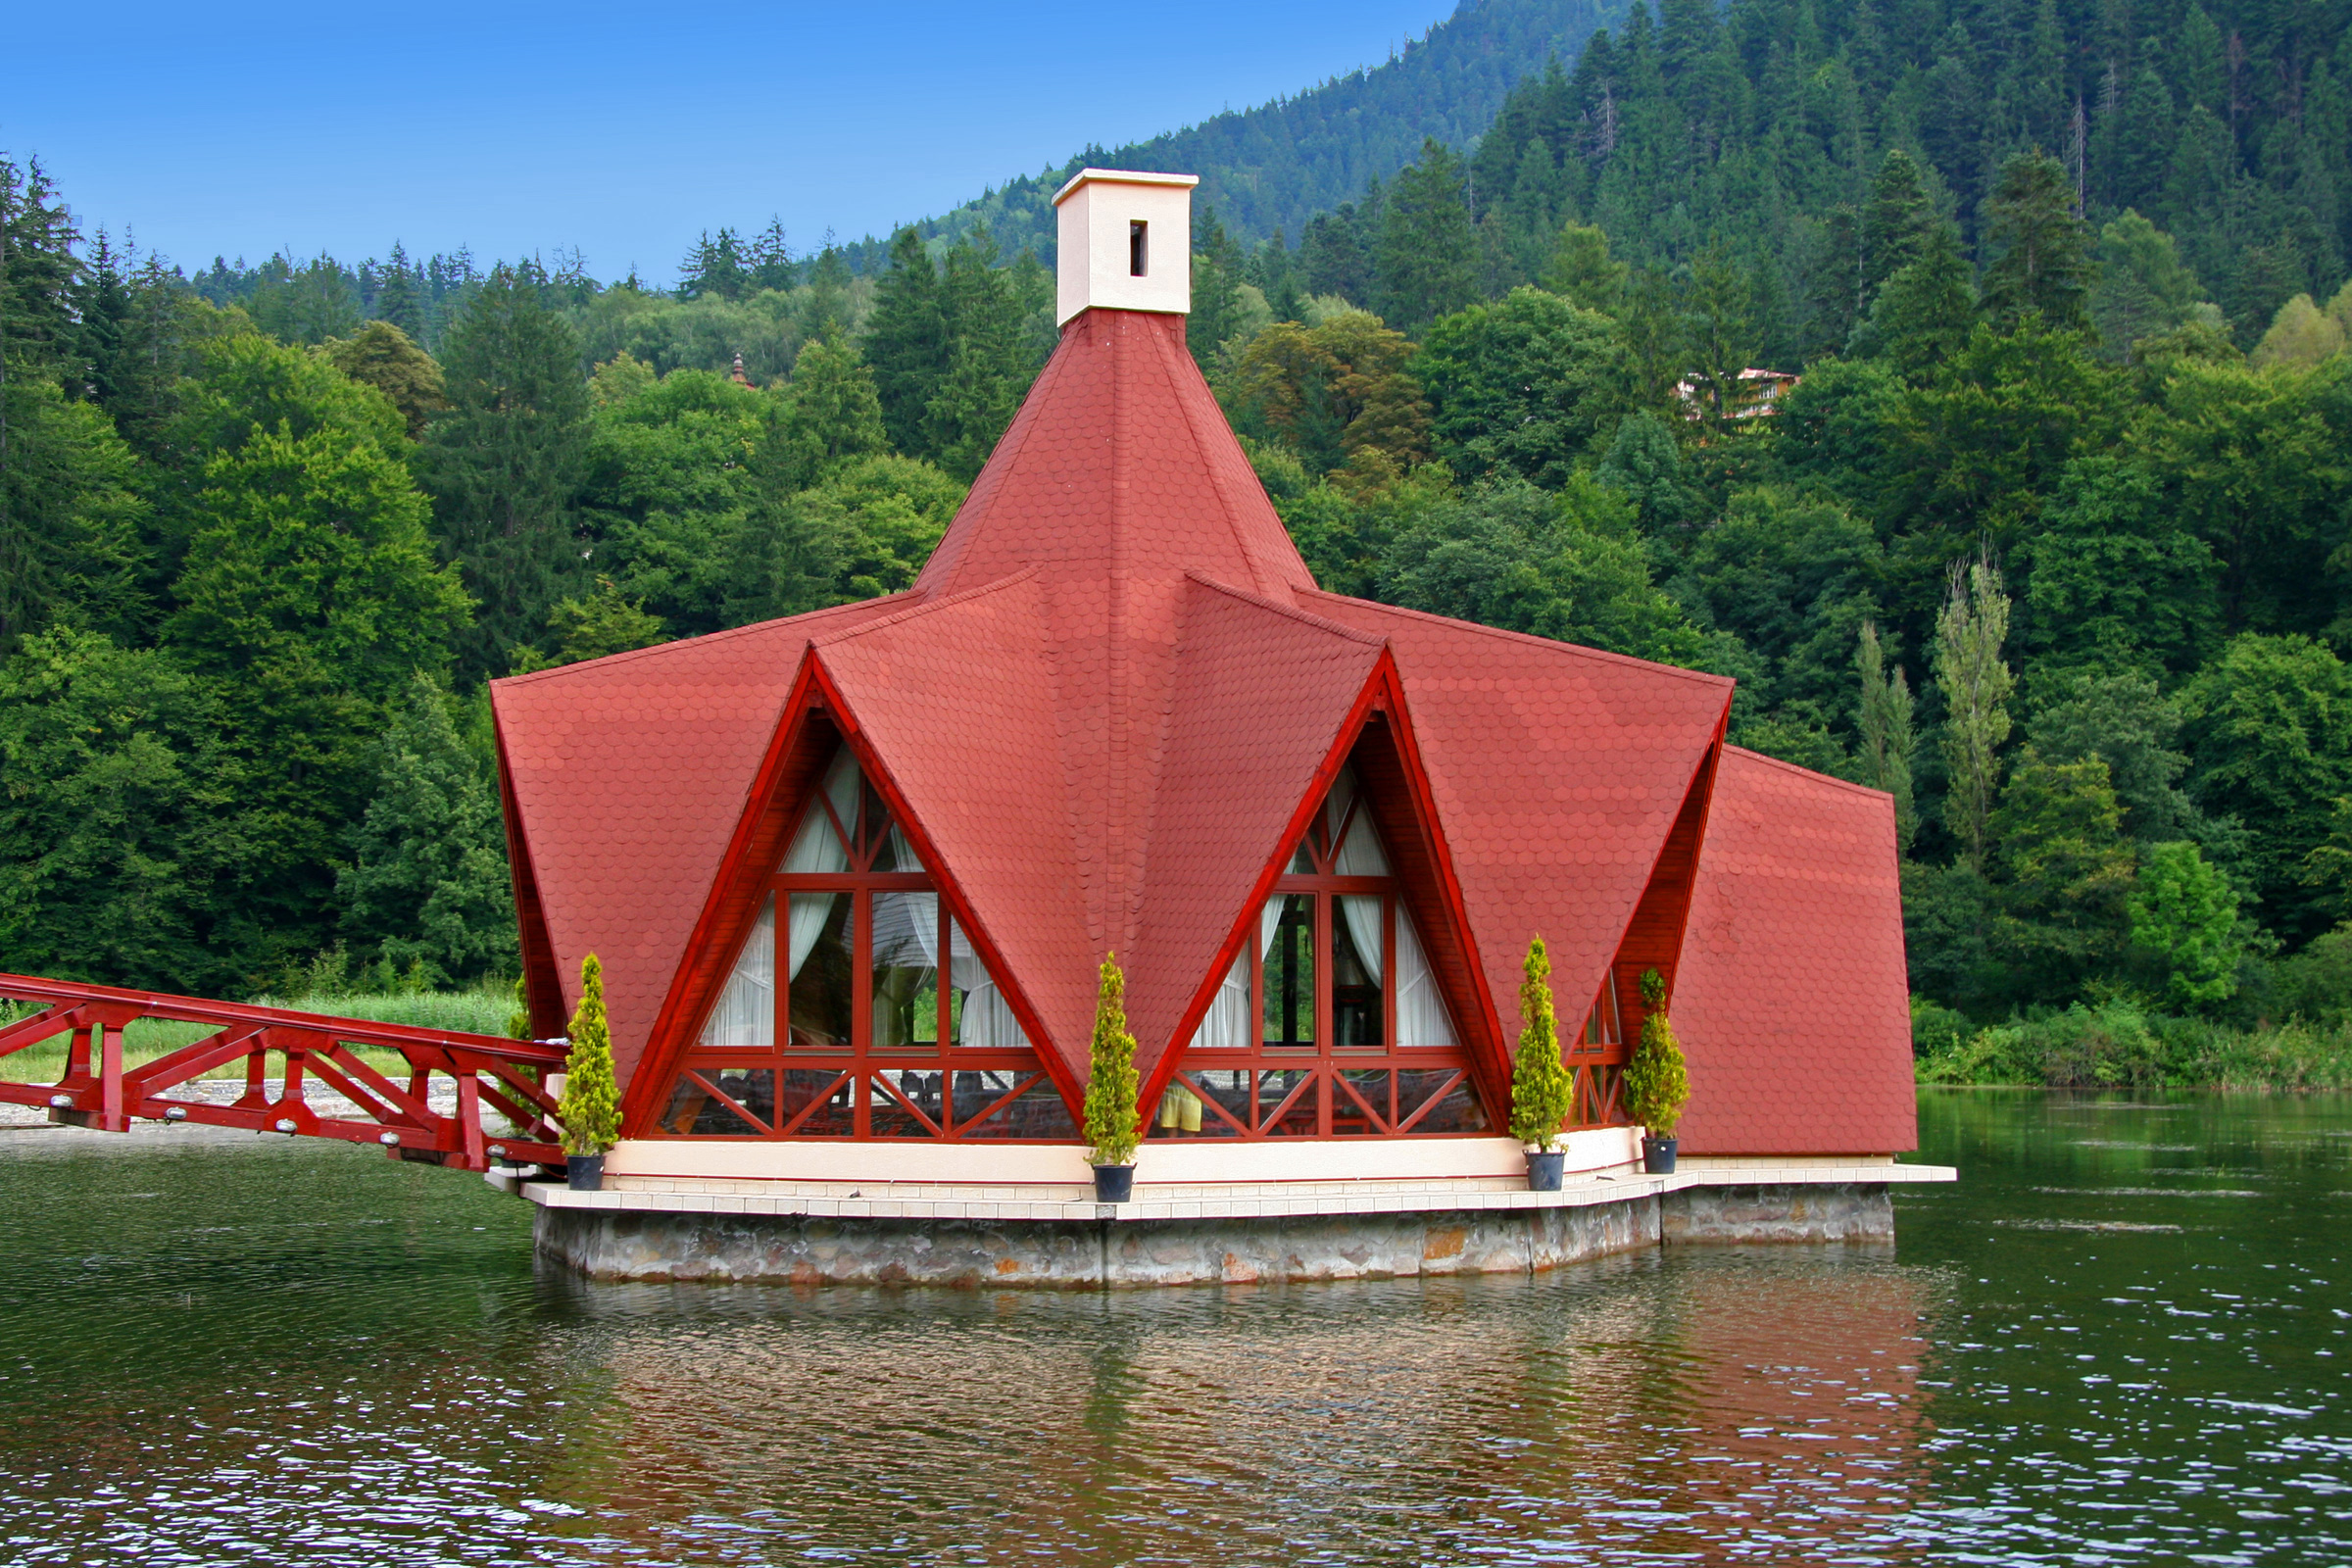 Restaurant on a lake in a tourist resort